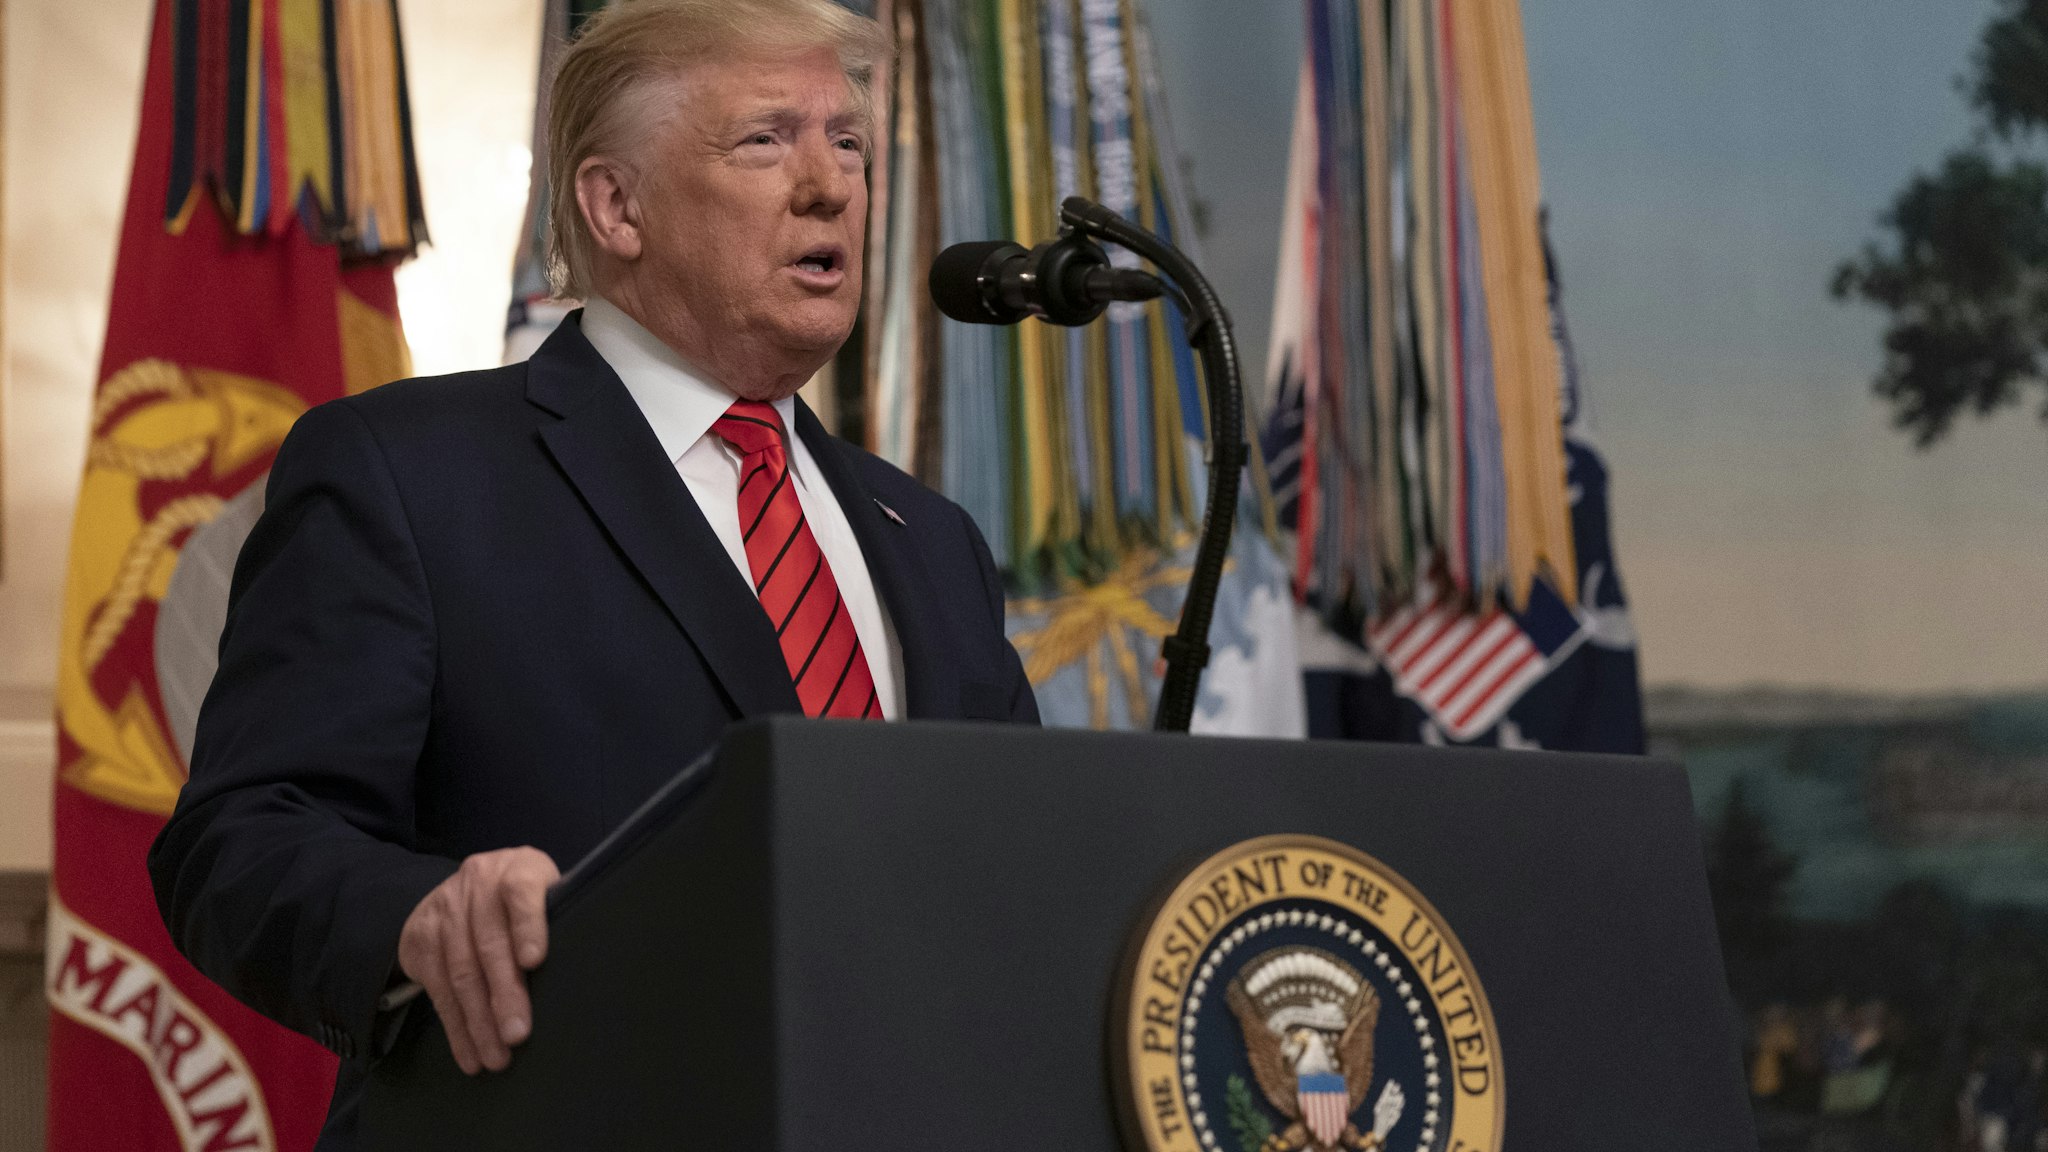 U.S. President Donald Trump speaks during a press conference in the Diplomatic Room of the White House in Washington, D.C., U.S., on Sunday, Oct. 27, 2019. Trump said Abu Bakr al-Baghdadi is dead after a U.S. military raid in northern Syria that left the Islamic State leader "in utter fear, in total panic and dread" in his final moments. Photographer: Chris Kleponis/Sipa USA/Bloomberg via Getty Images